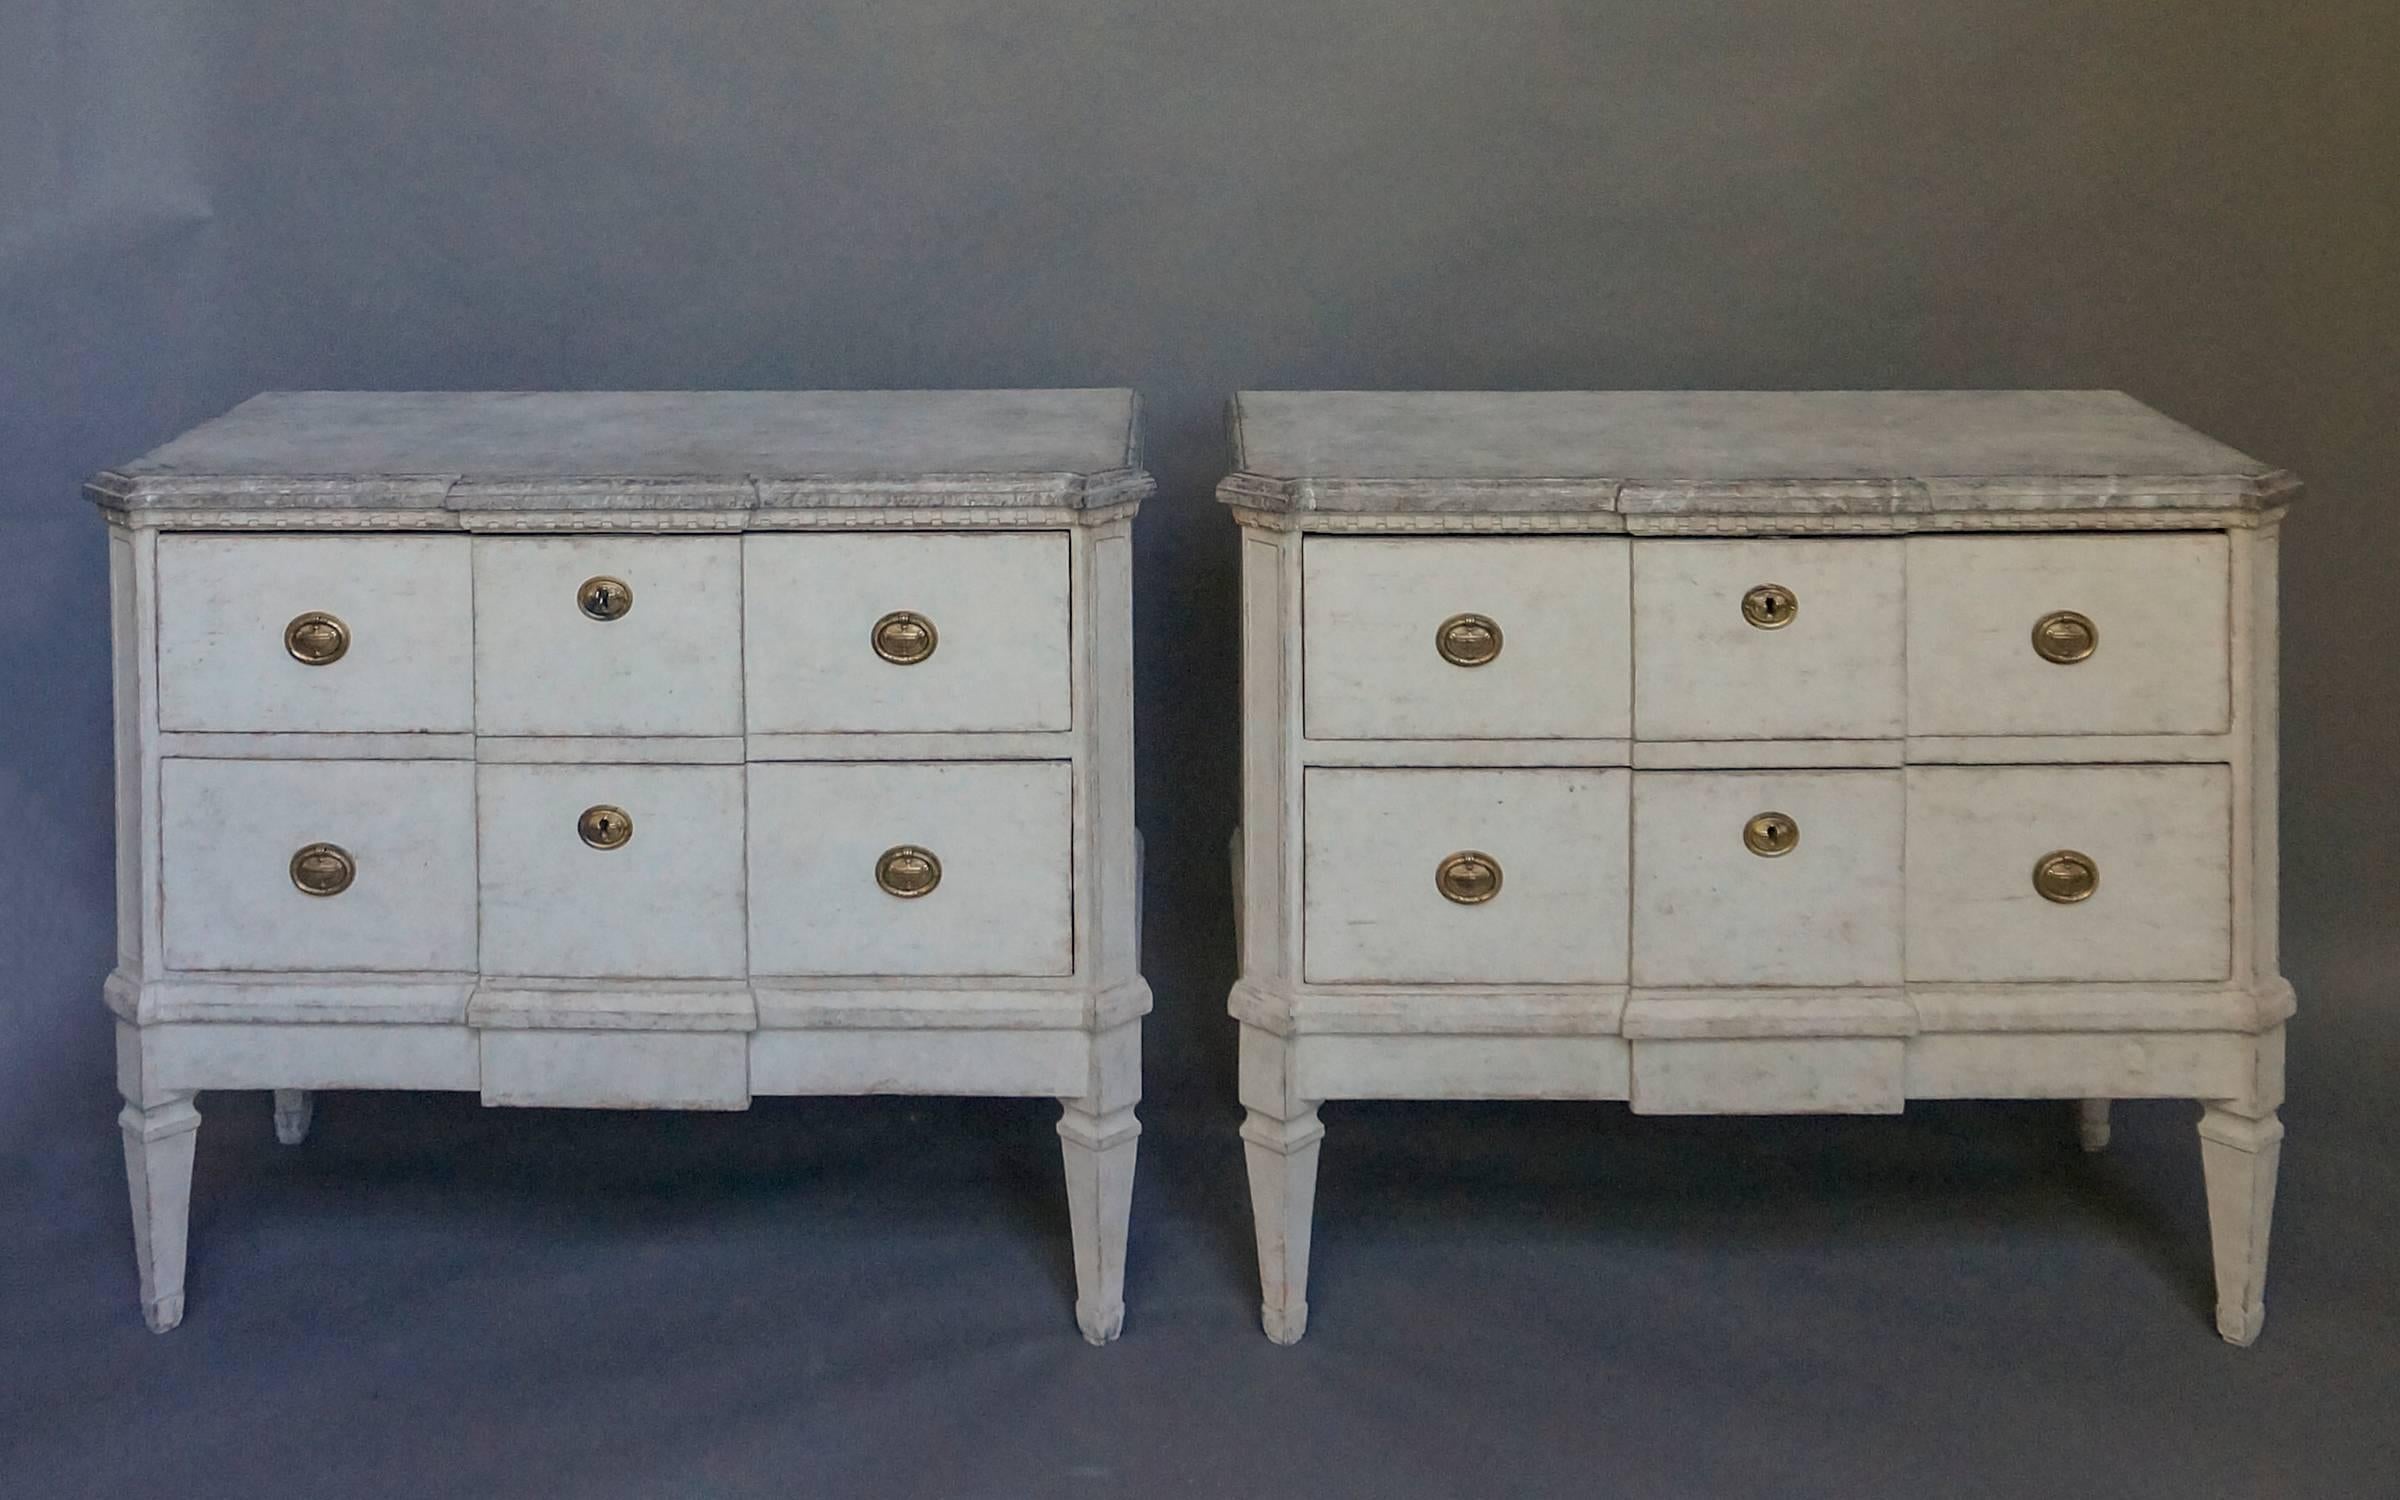 Pair of two-drawer chests in the Gustavian style, Sweden, circa 1840, with marbleized tops, dentil molding and canted corners.